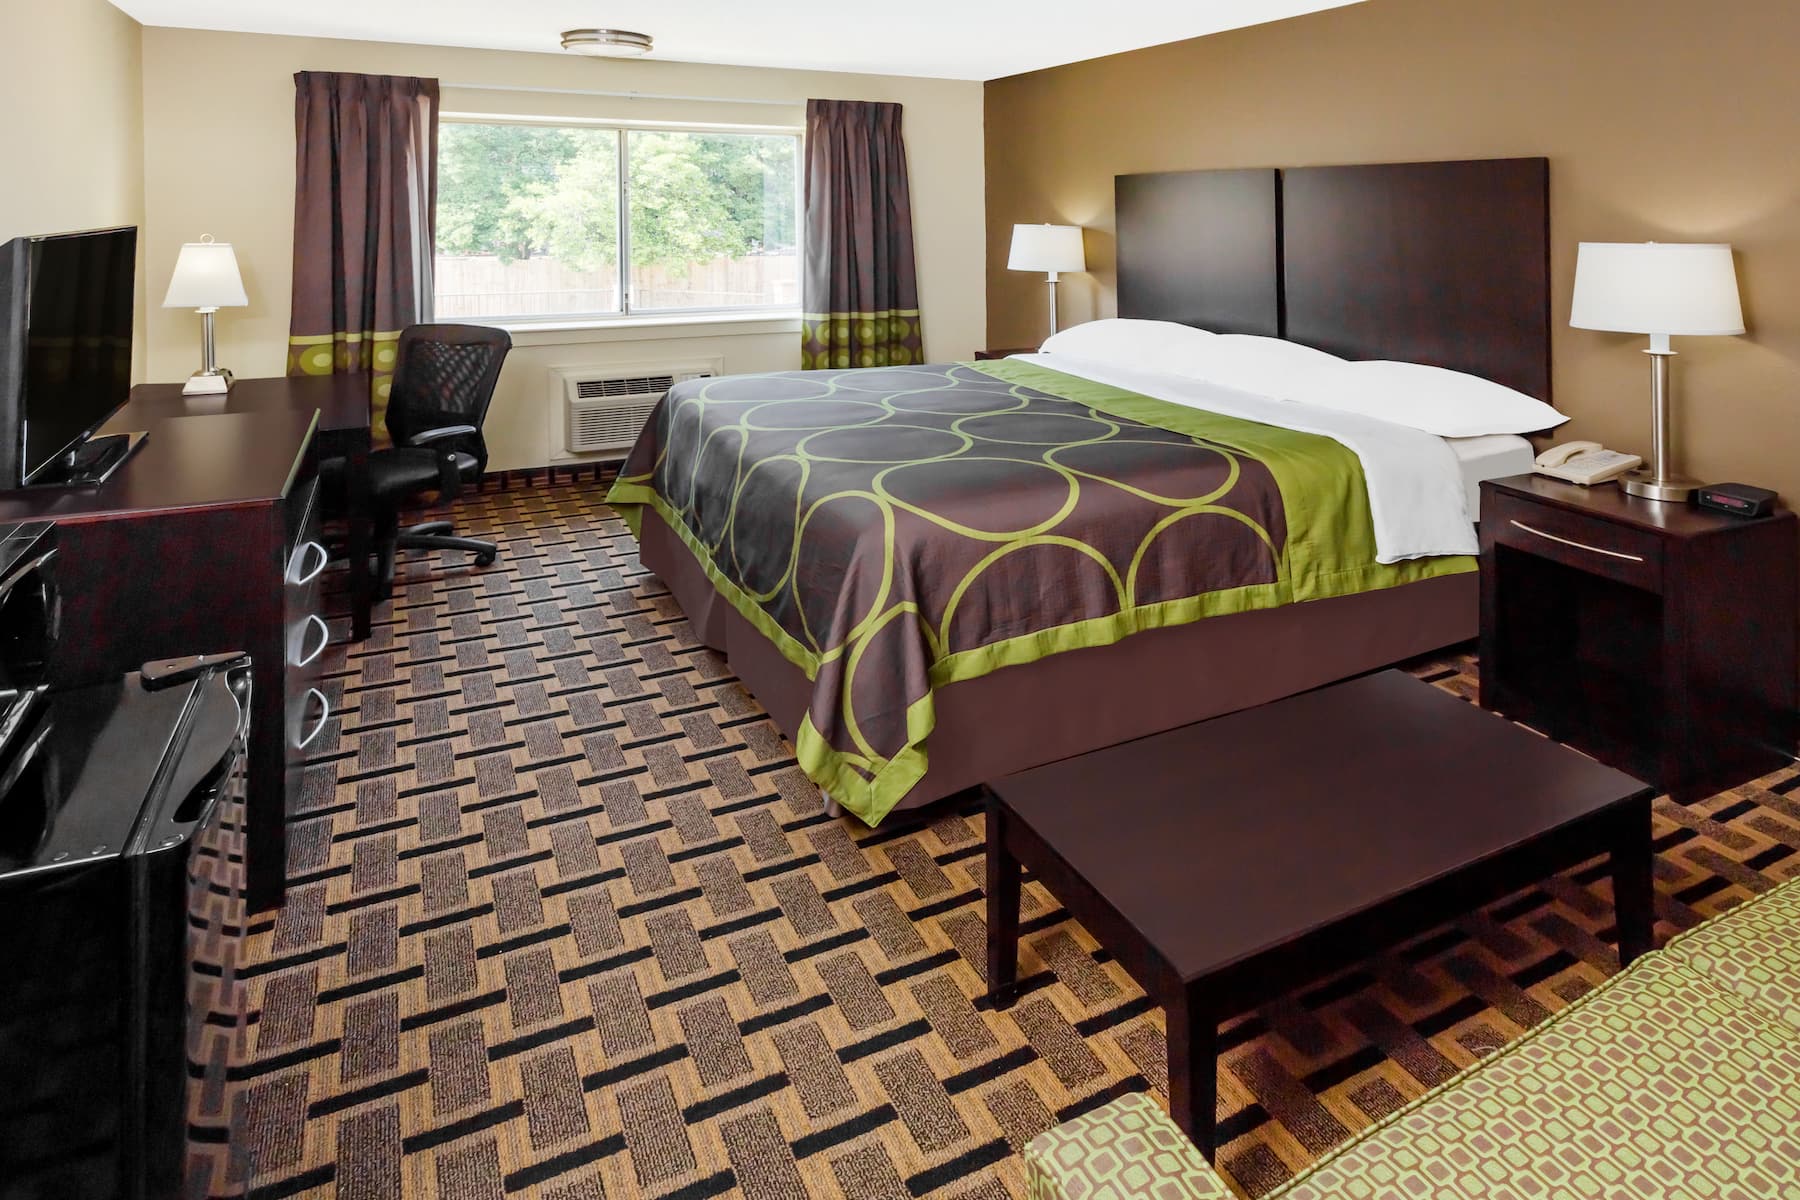 Guest room at the Super 8 by Wyndham Phenix City in Phenix City, Alabama.